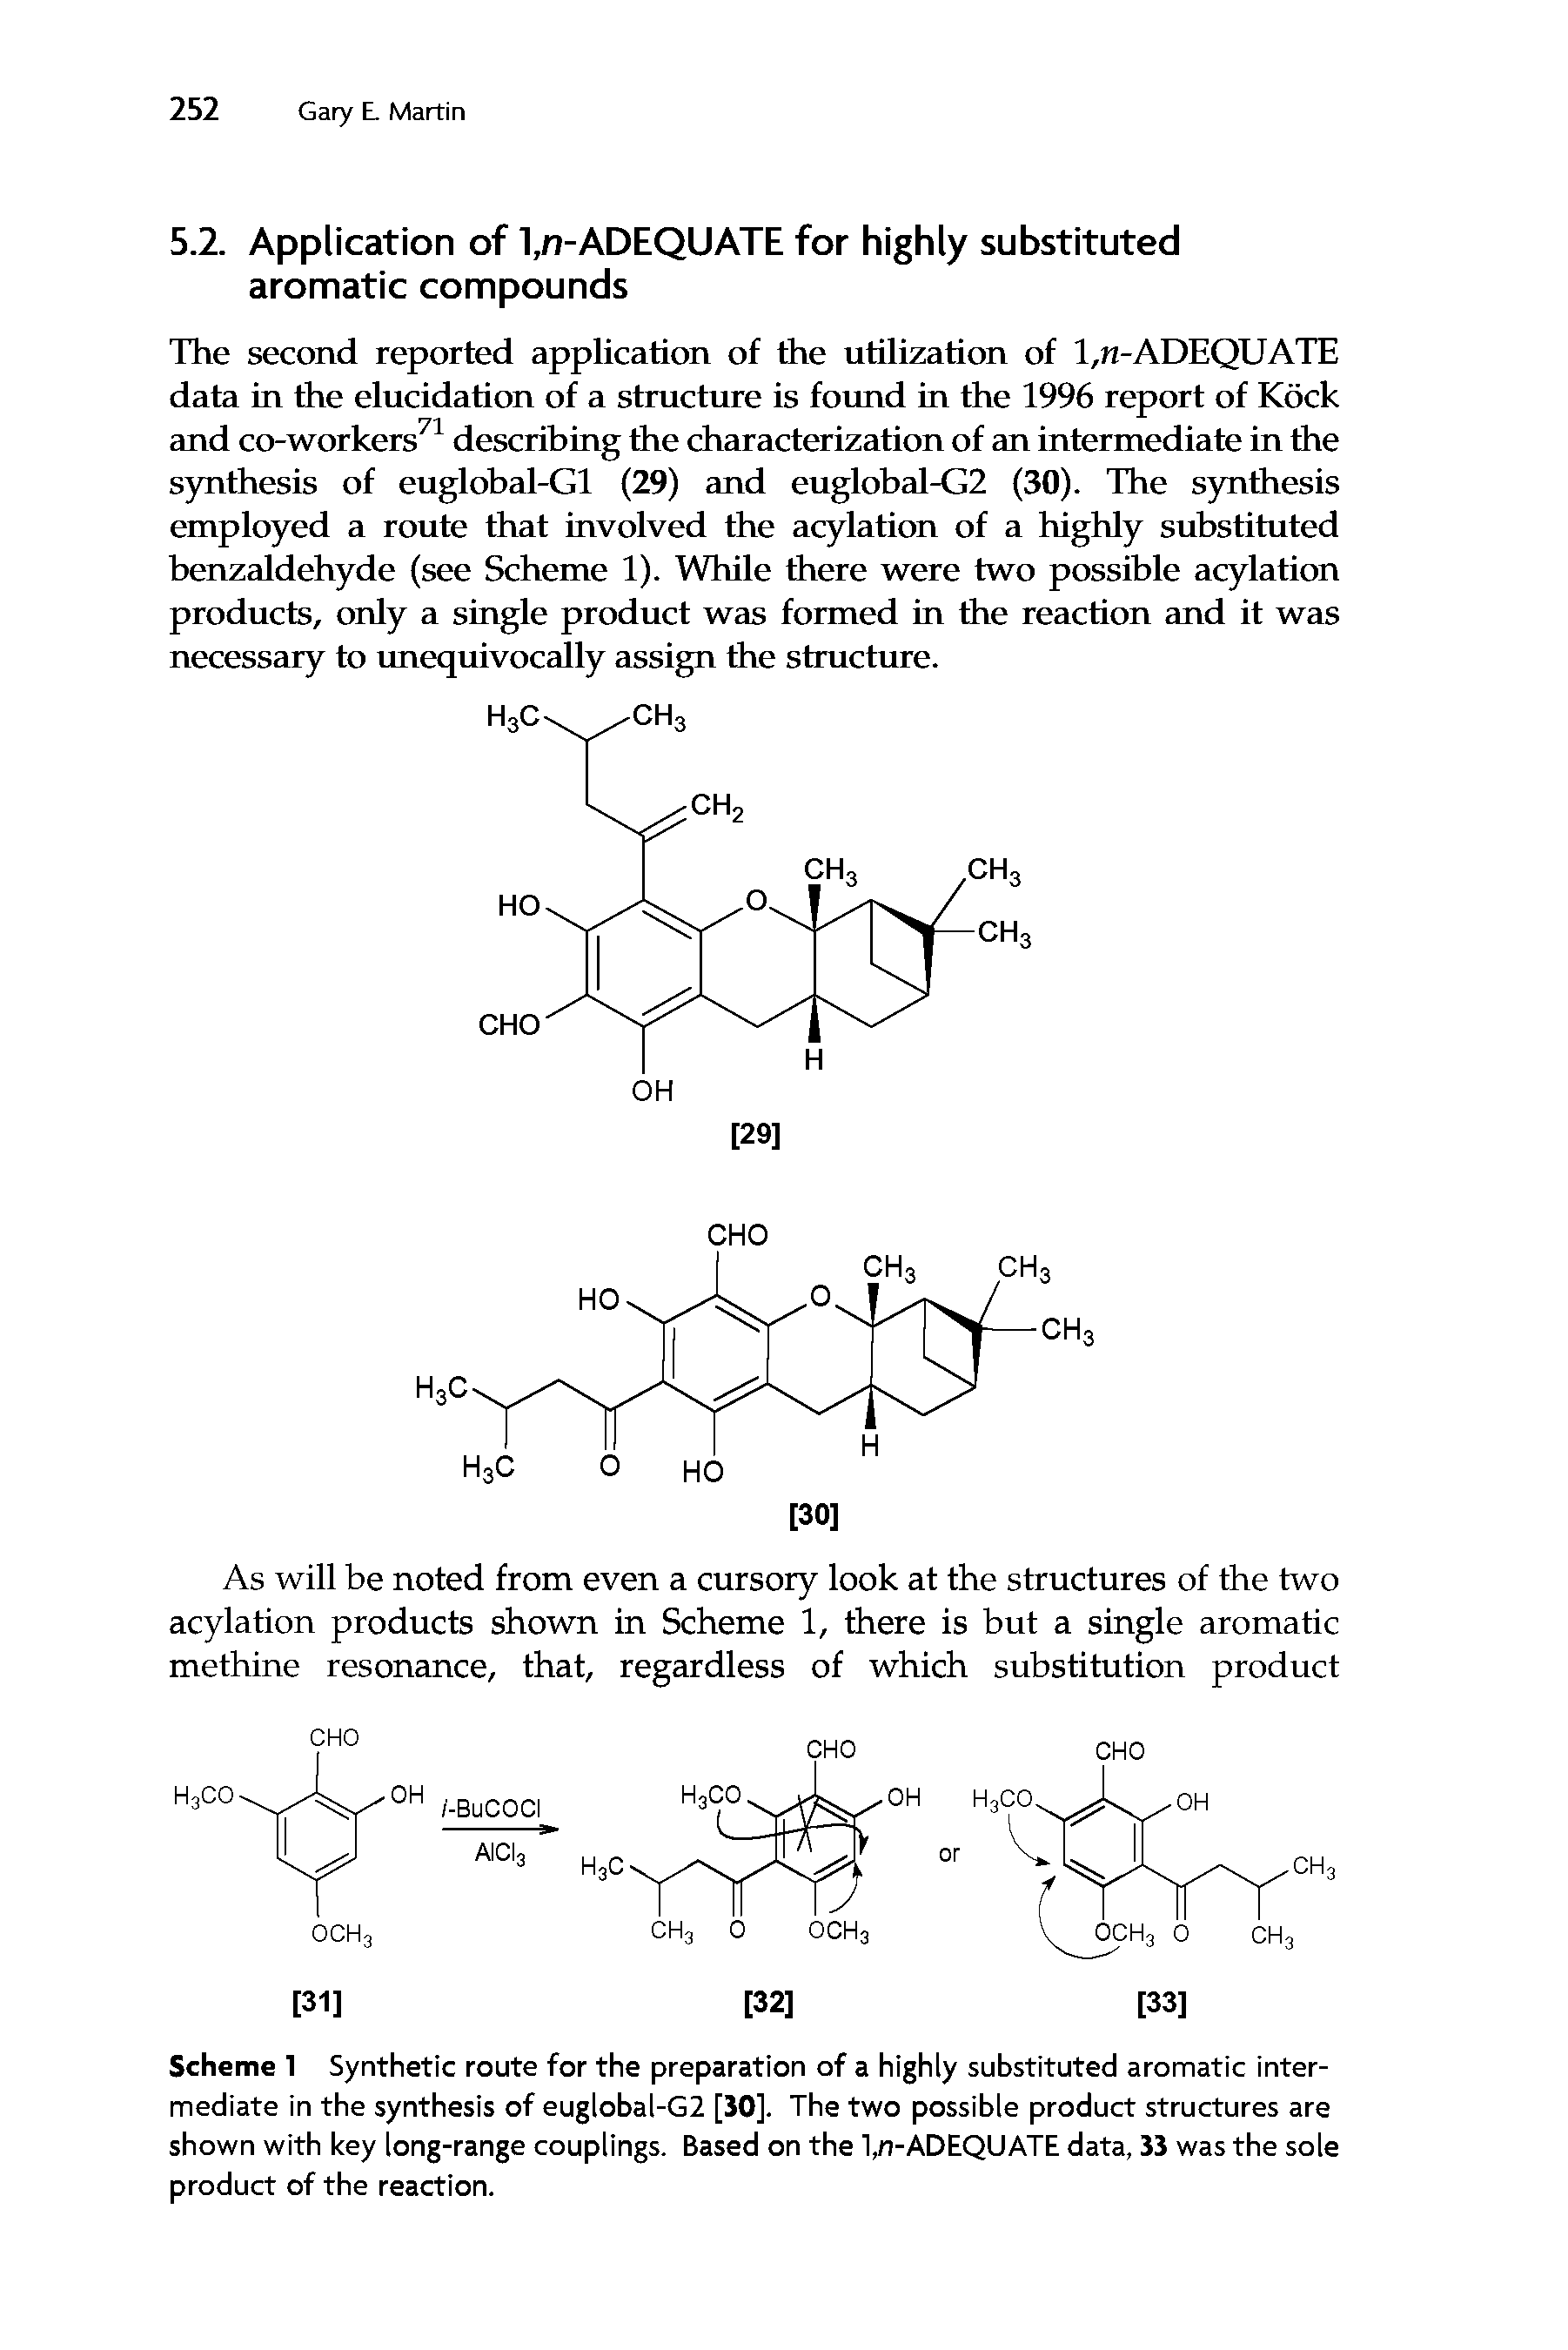 Scheme 1 Synthetic route for the preparation of a highly substituted aromatic intermediate in the synthesis of euglobal-G2 [30]. The two possible product structures are shown with key long-range couplings. Based on the INADEQUATE data, 33 was the sole product of the reaction.